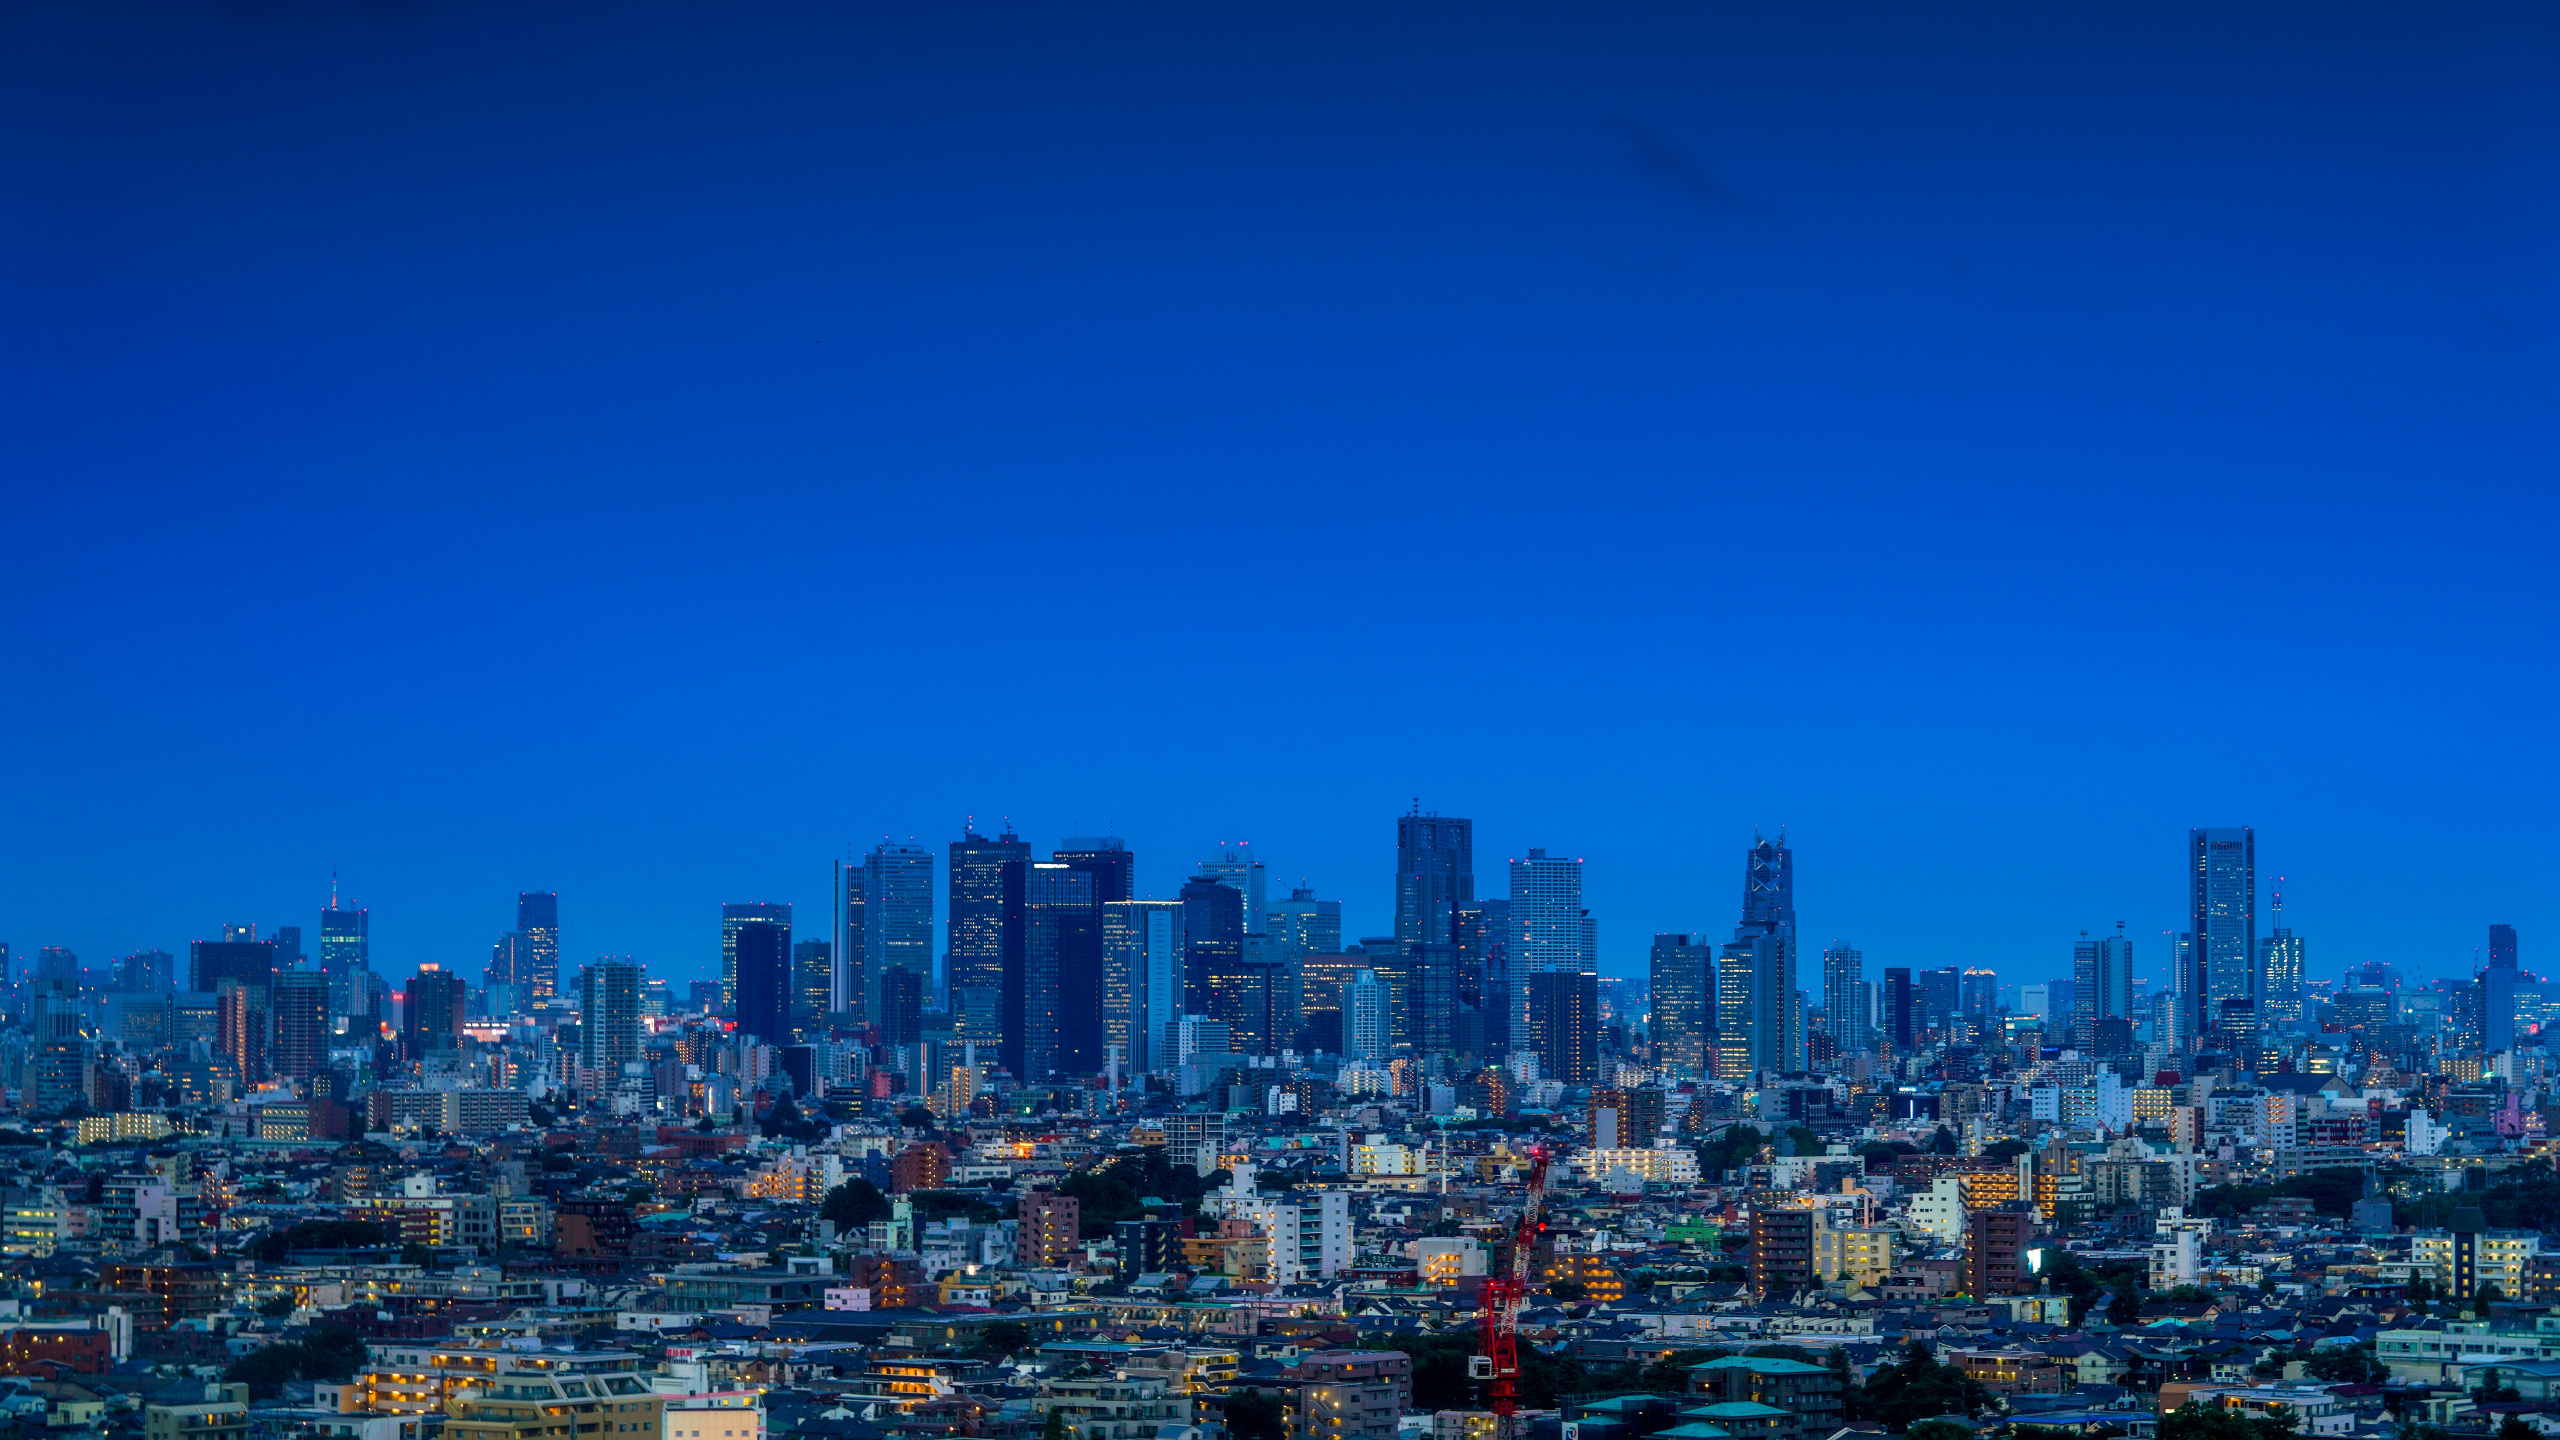 City With High Rise Buildings Under Blue Sky During Daytime. Wallpaper in 2560x1440 Resolution